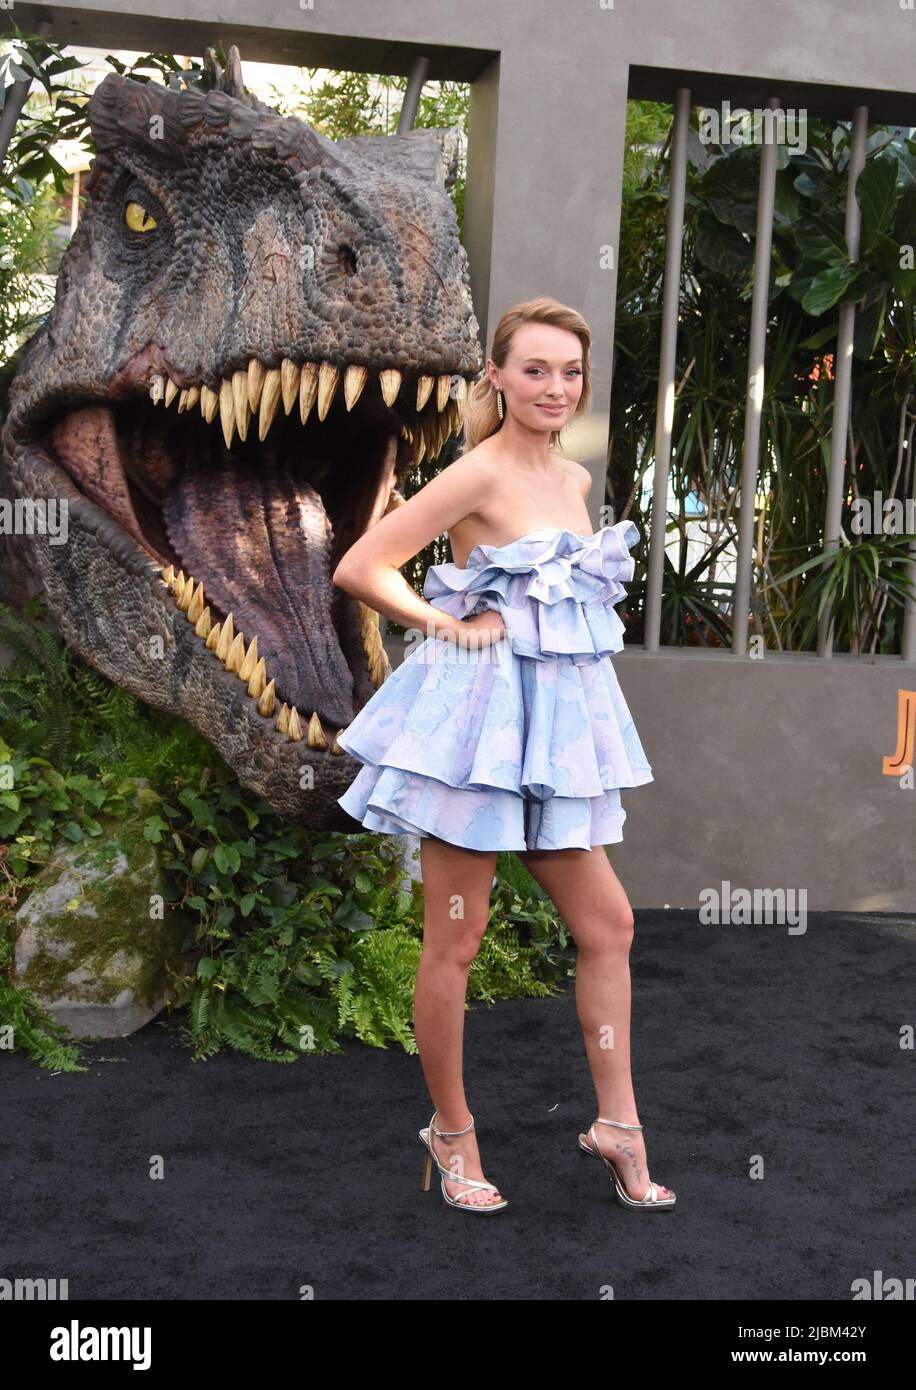 Hollywood, California, USA. 6th June, 2022. Actress Elva Trill attends Universal Pictures Presents The World Premiere of 'Jurassic World Dominion' at TCL Chinese Theatre on June 6, 2022 in Hollywood, California, USA. Credit: Barry King/Alamy Live News Stock Photo